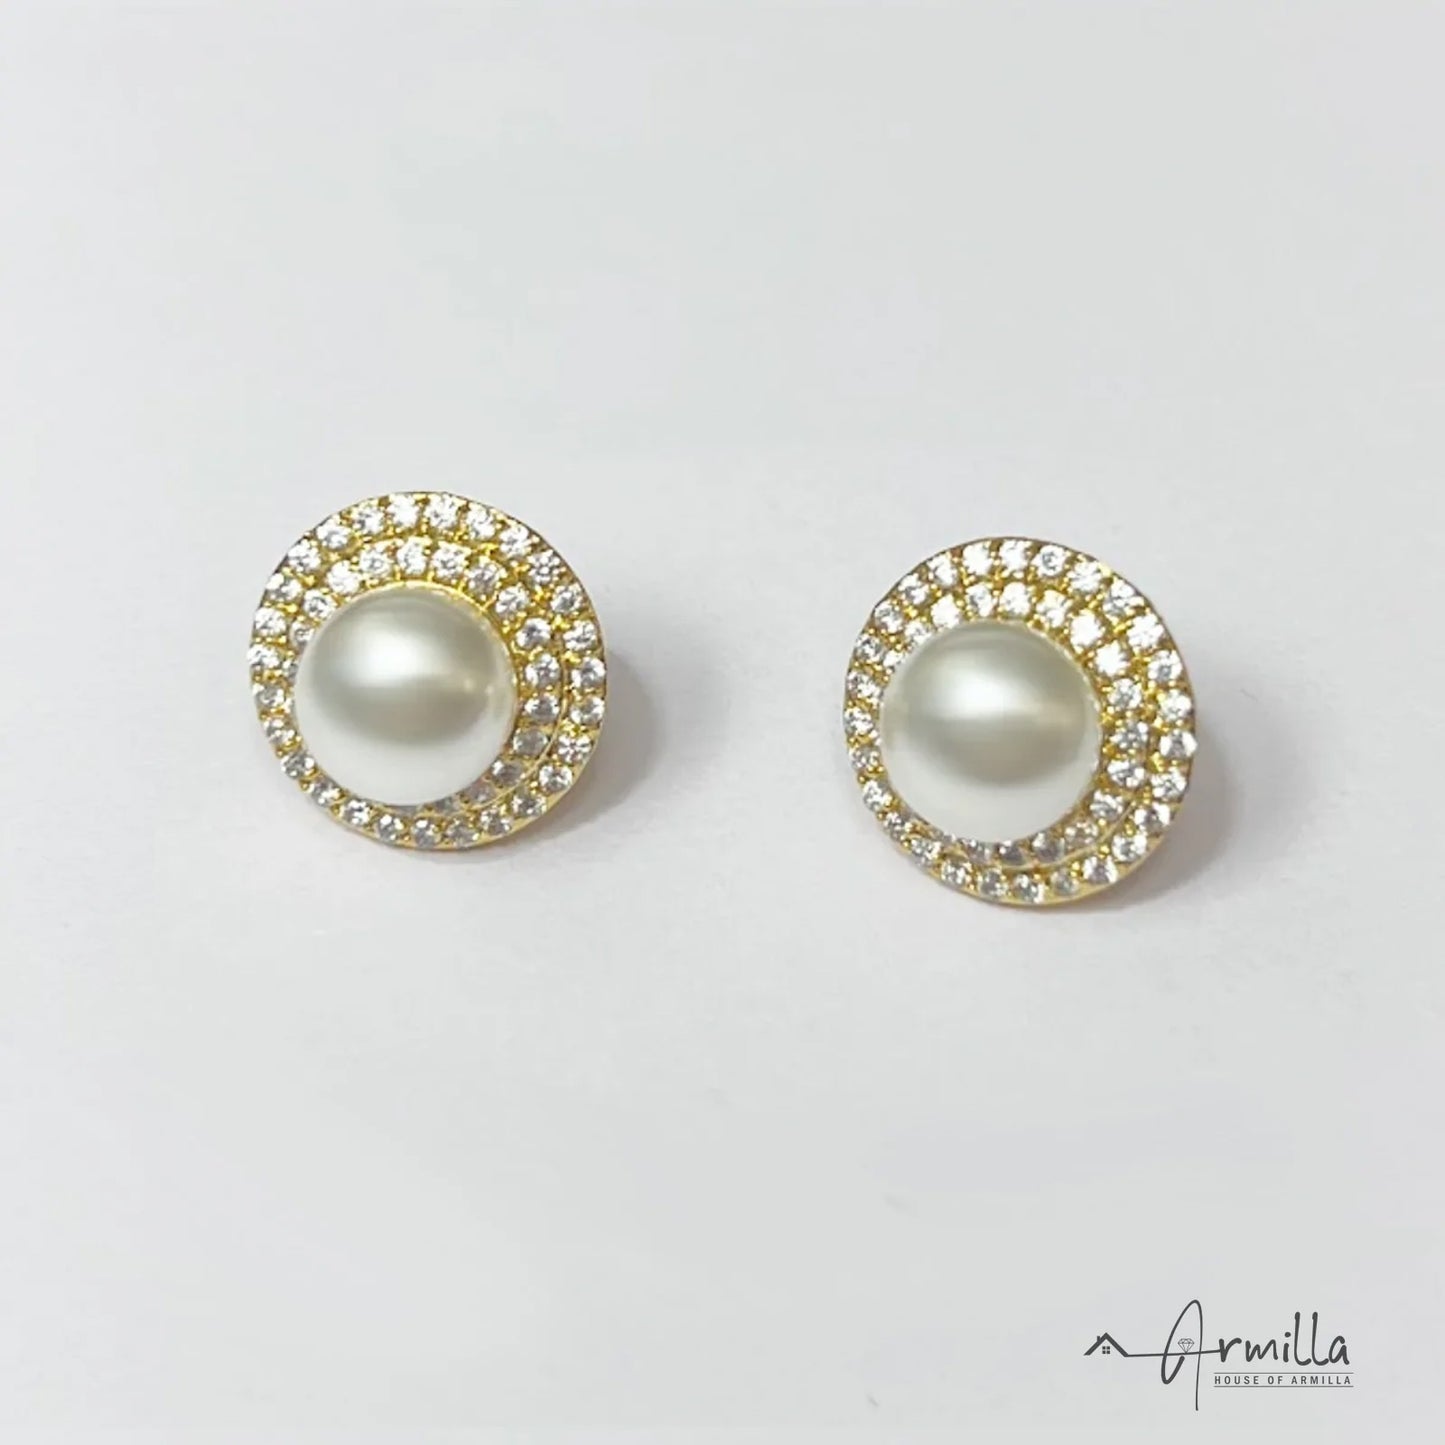 White Pearl Stud Earrings with Gold Toned Border